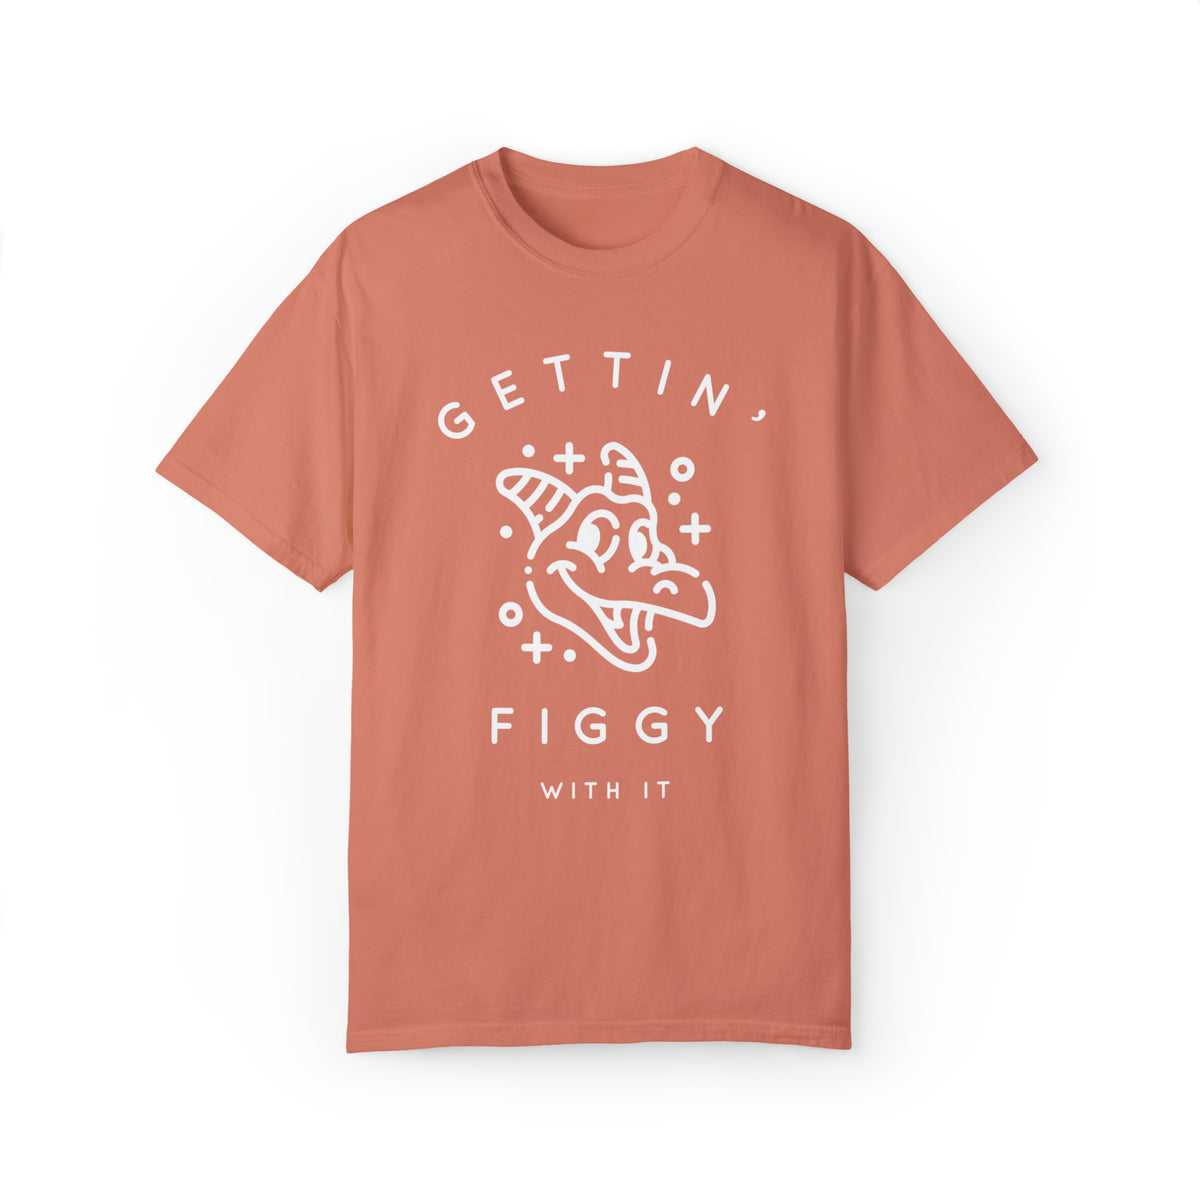 Gettin' Figgy With It Comfort Colors Unisex Garment-Dyed T-shirt